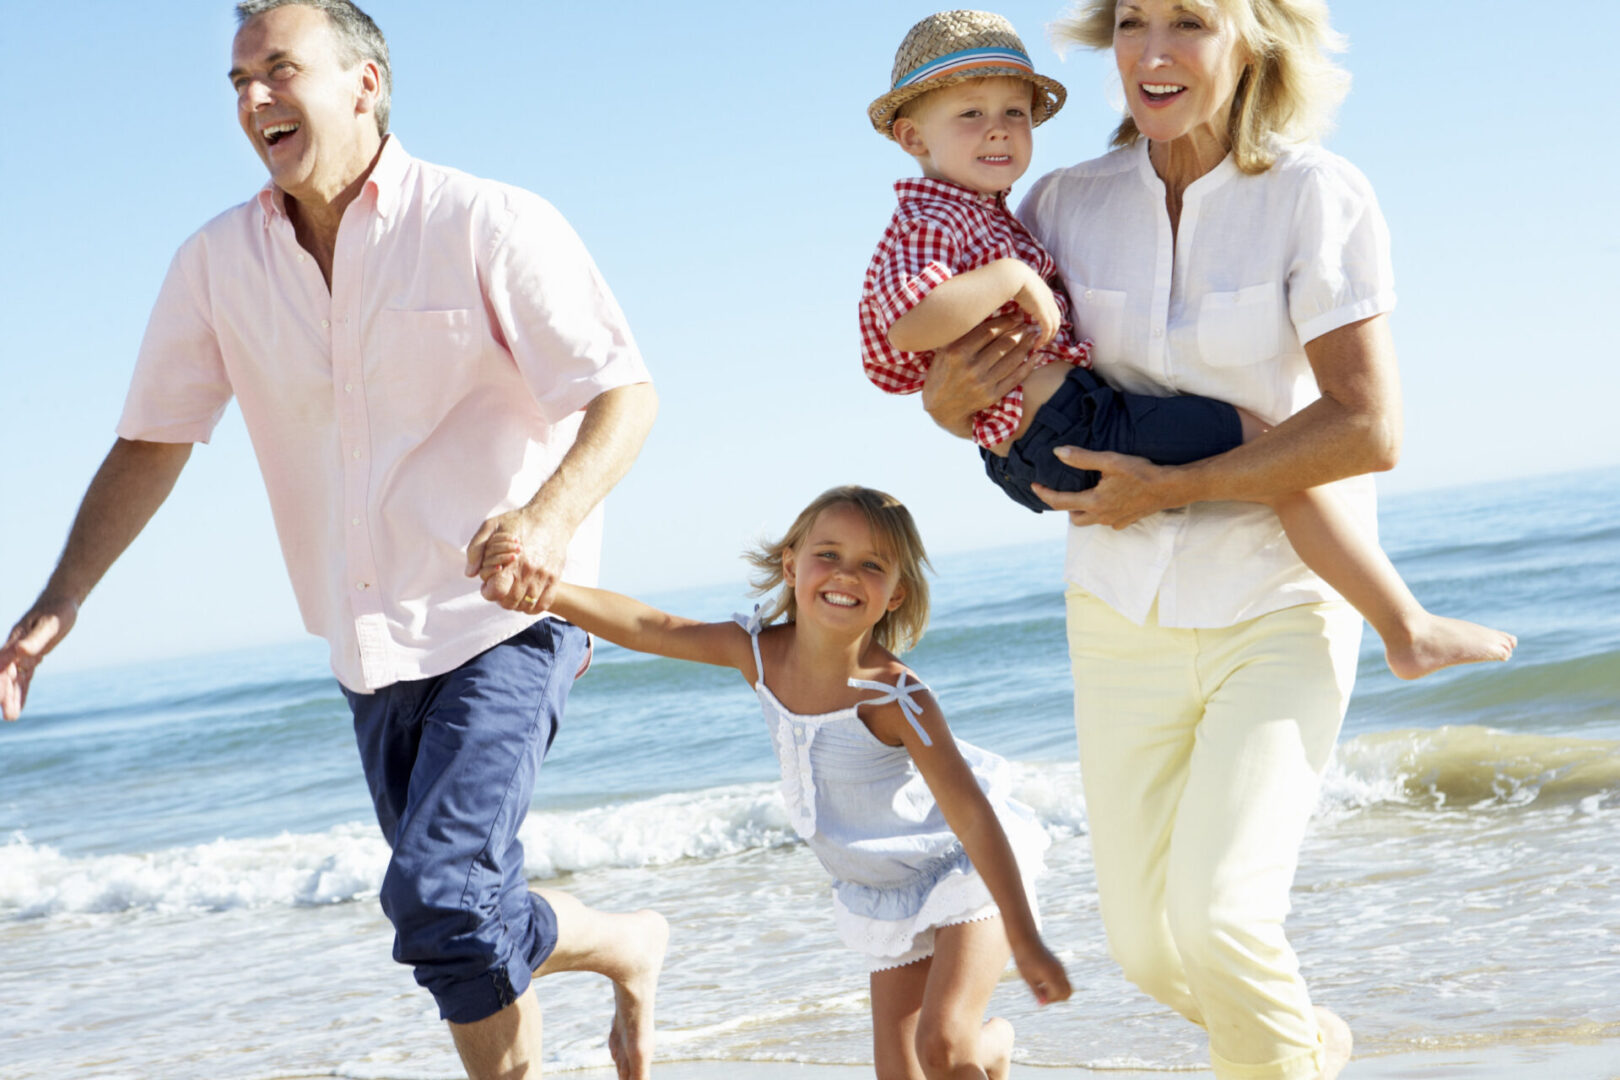 Grandparents running on the beach with their family being playful and energetic